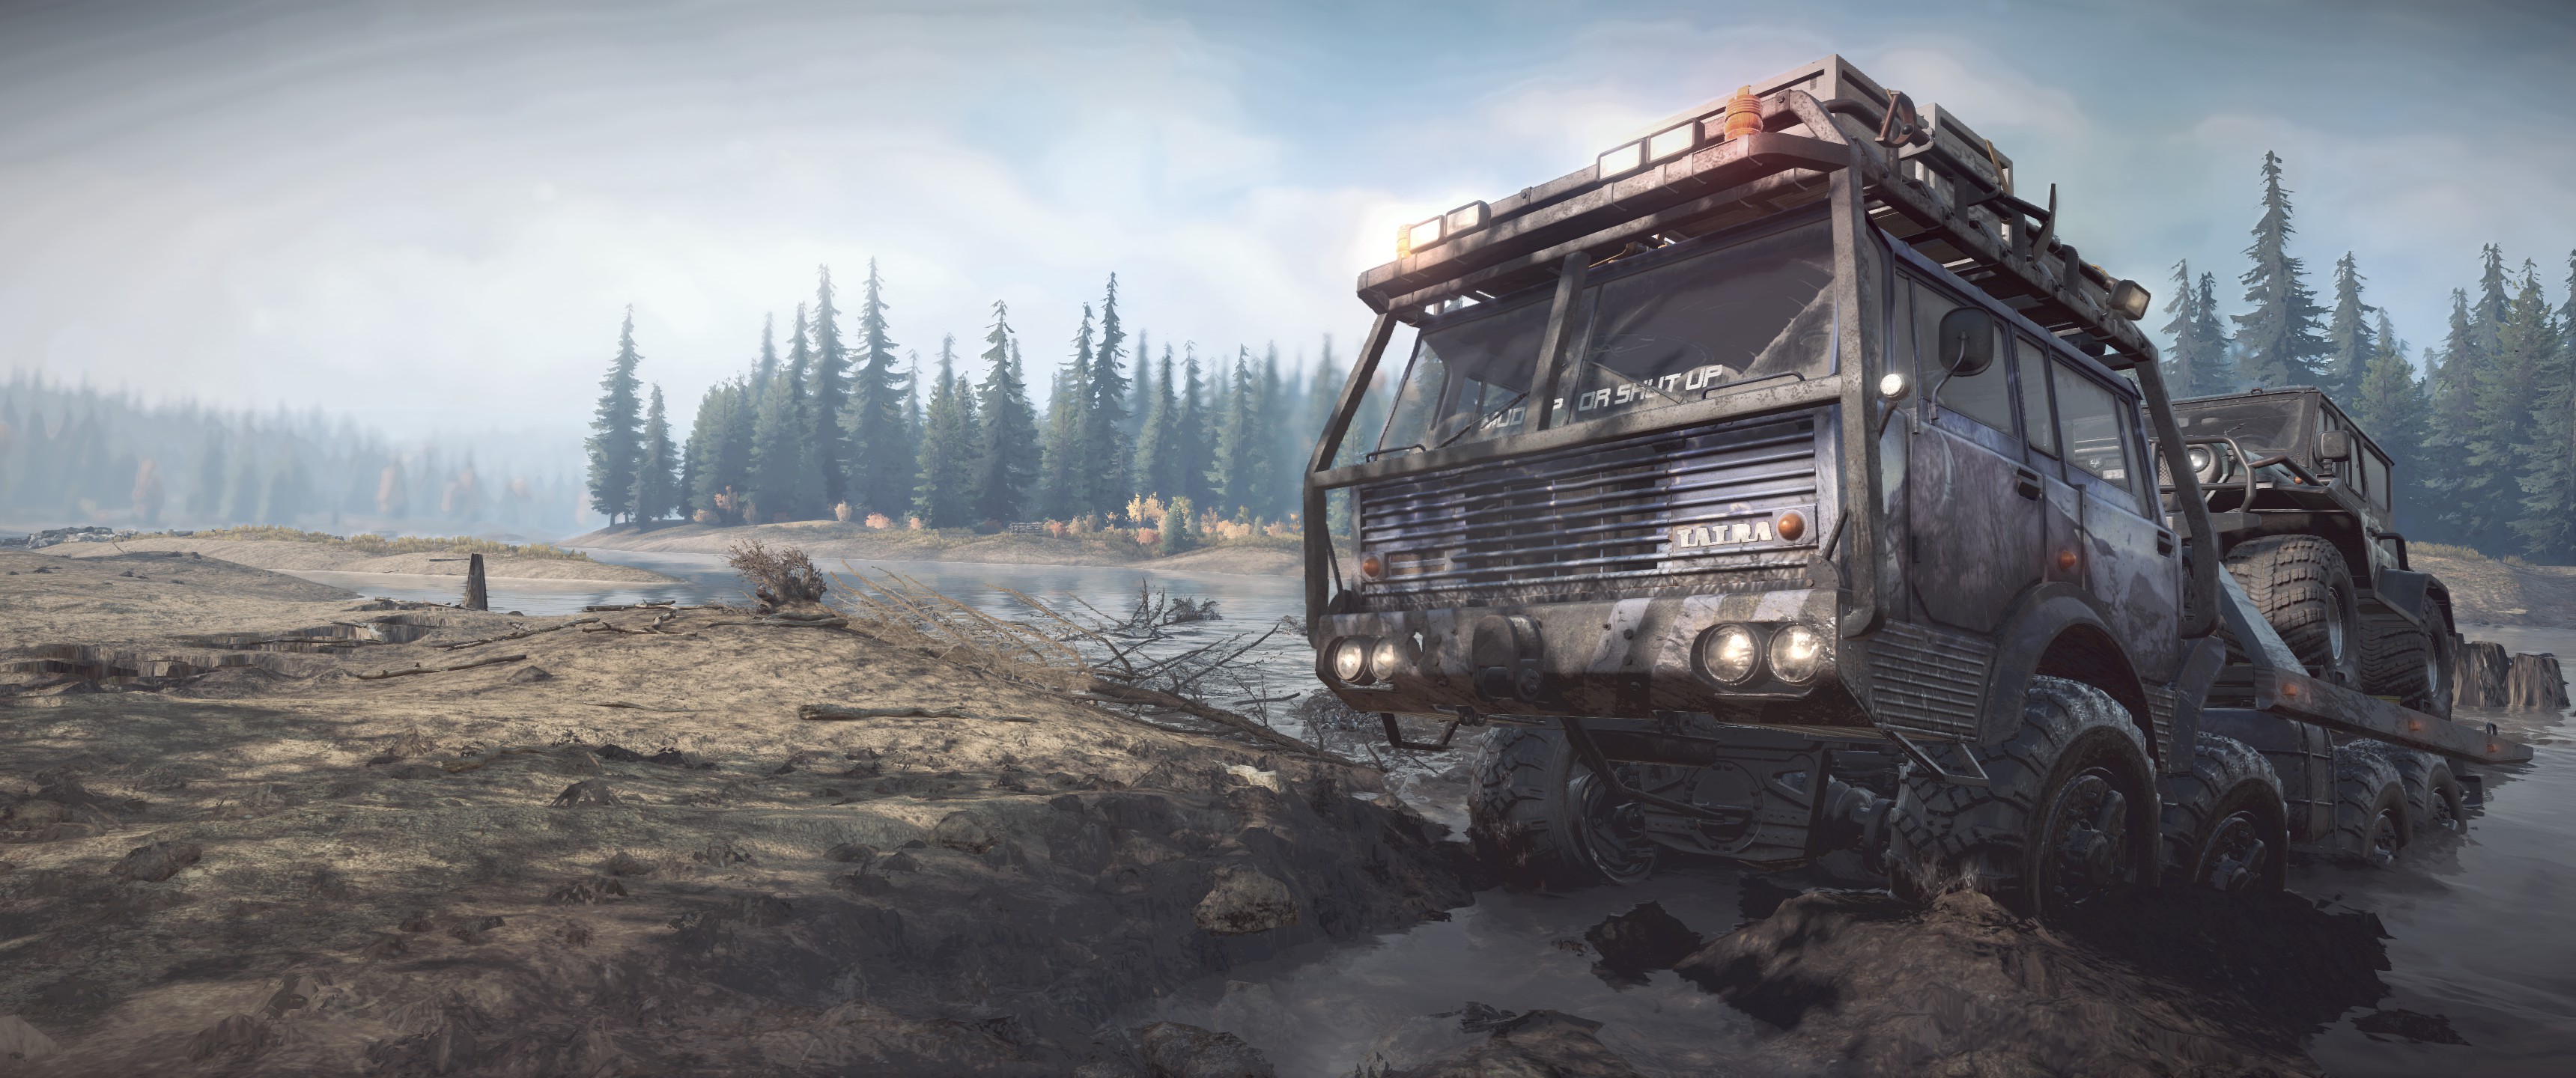 General 3440x1440 Snowrunner truck mud Michigan screen shot ultrawide forest river offroad trees video games sky clouds frontal view headlights water